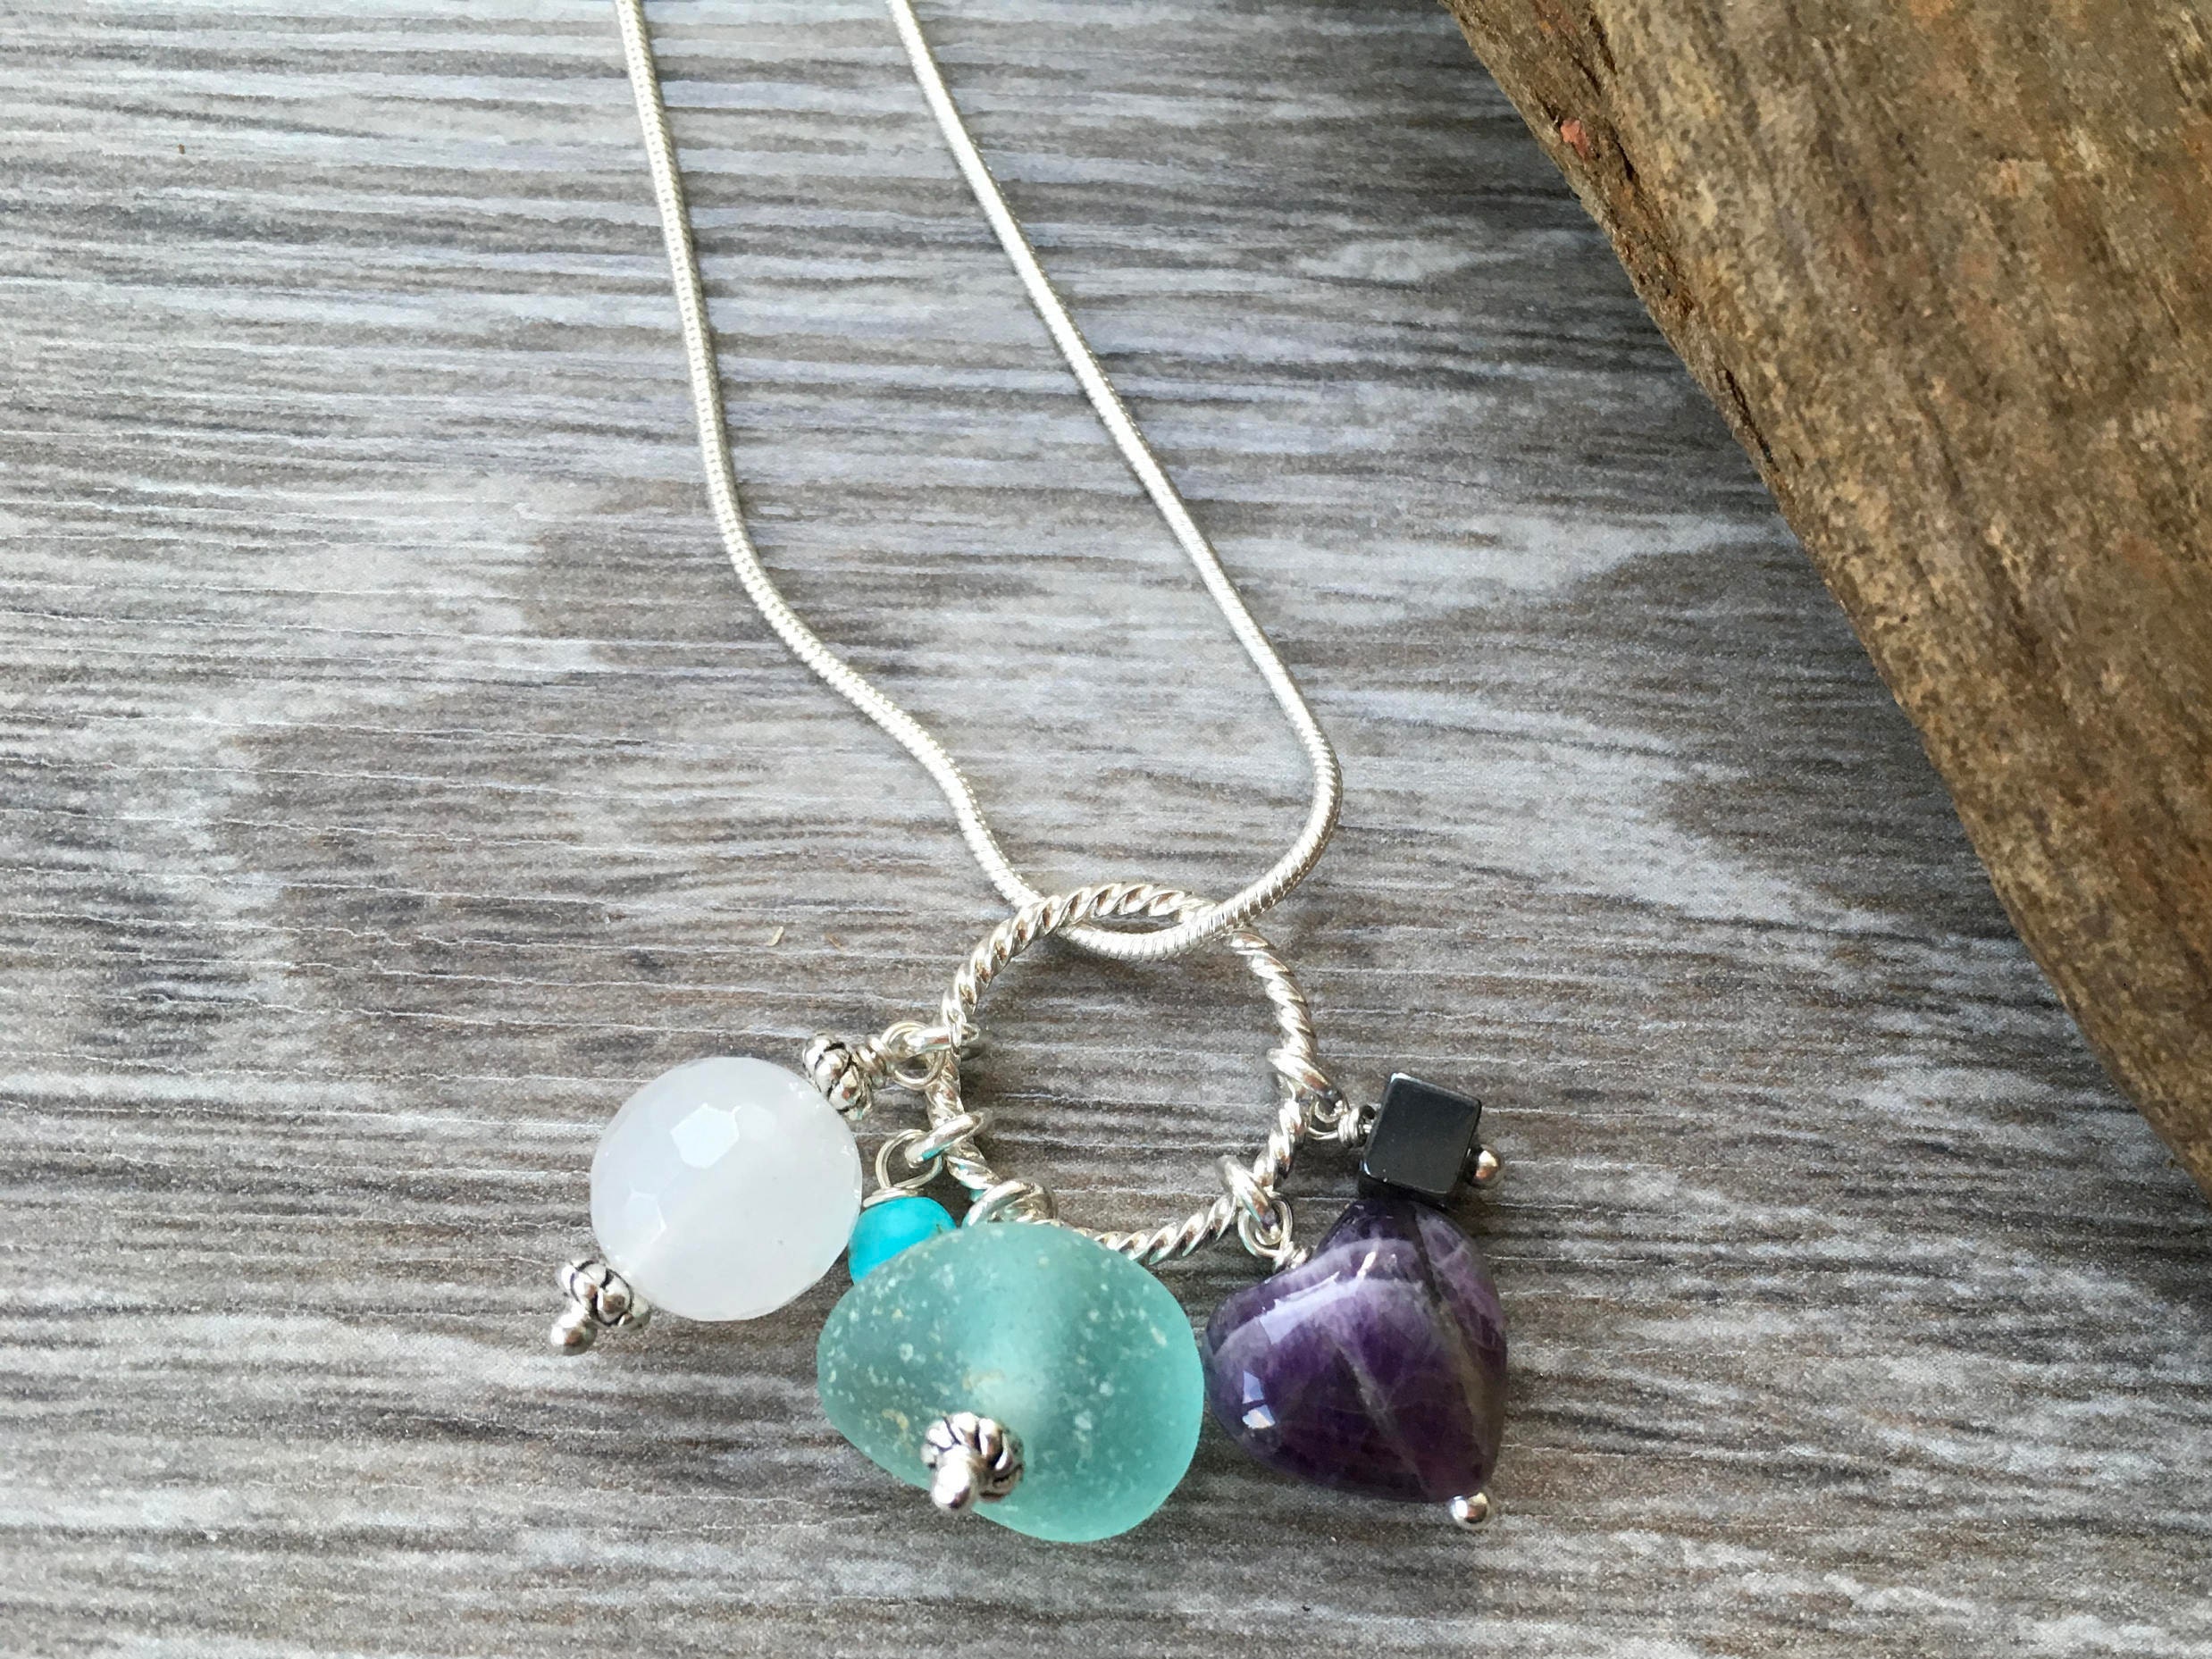 Pale blue Sea glass necklace, gemstone jewelry, cluster charm pendant ...